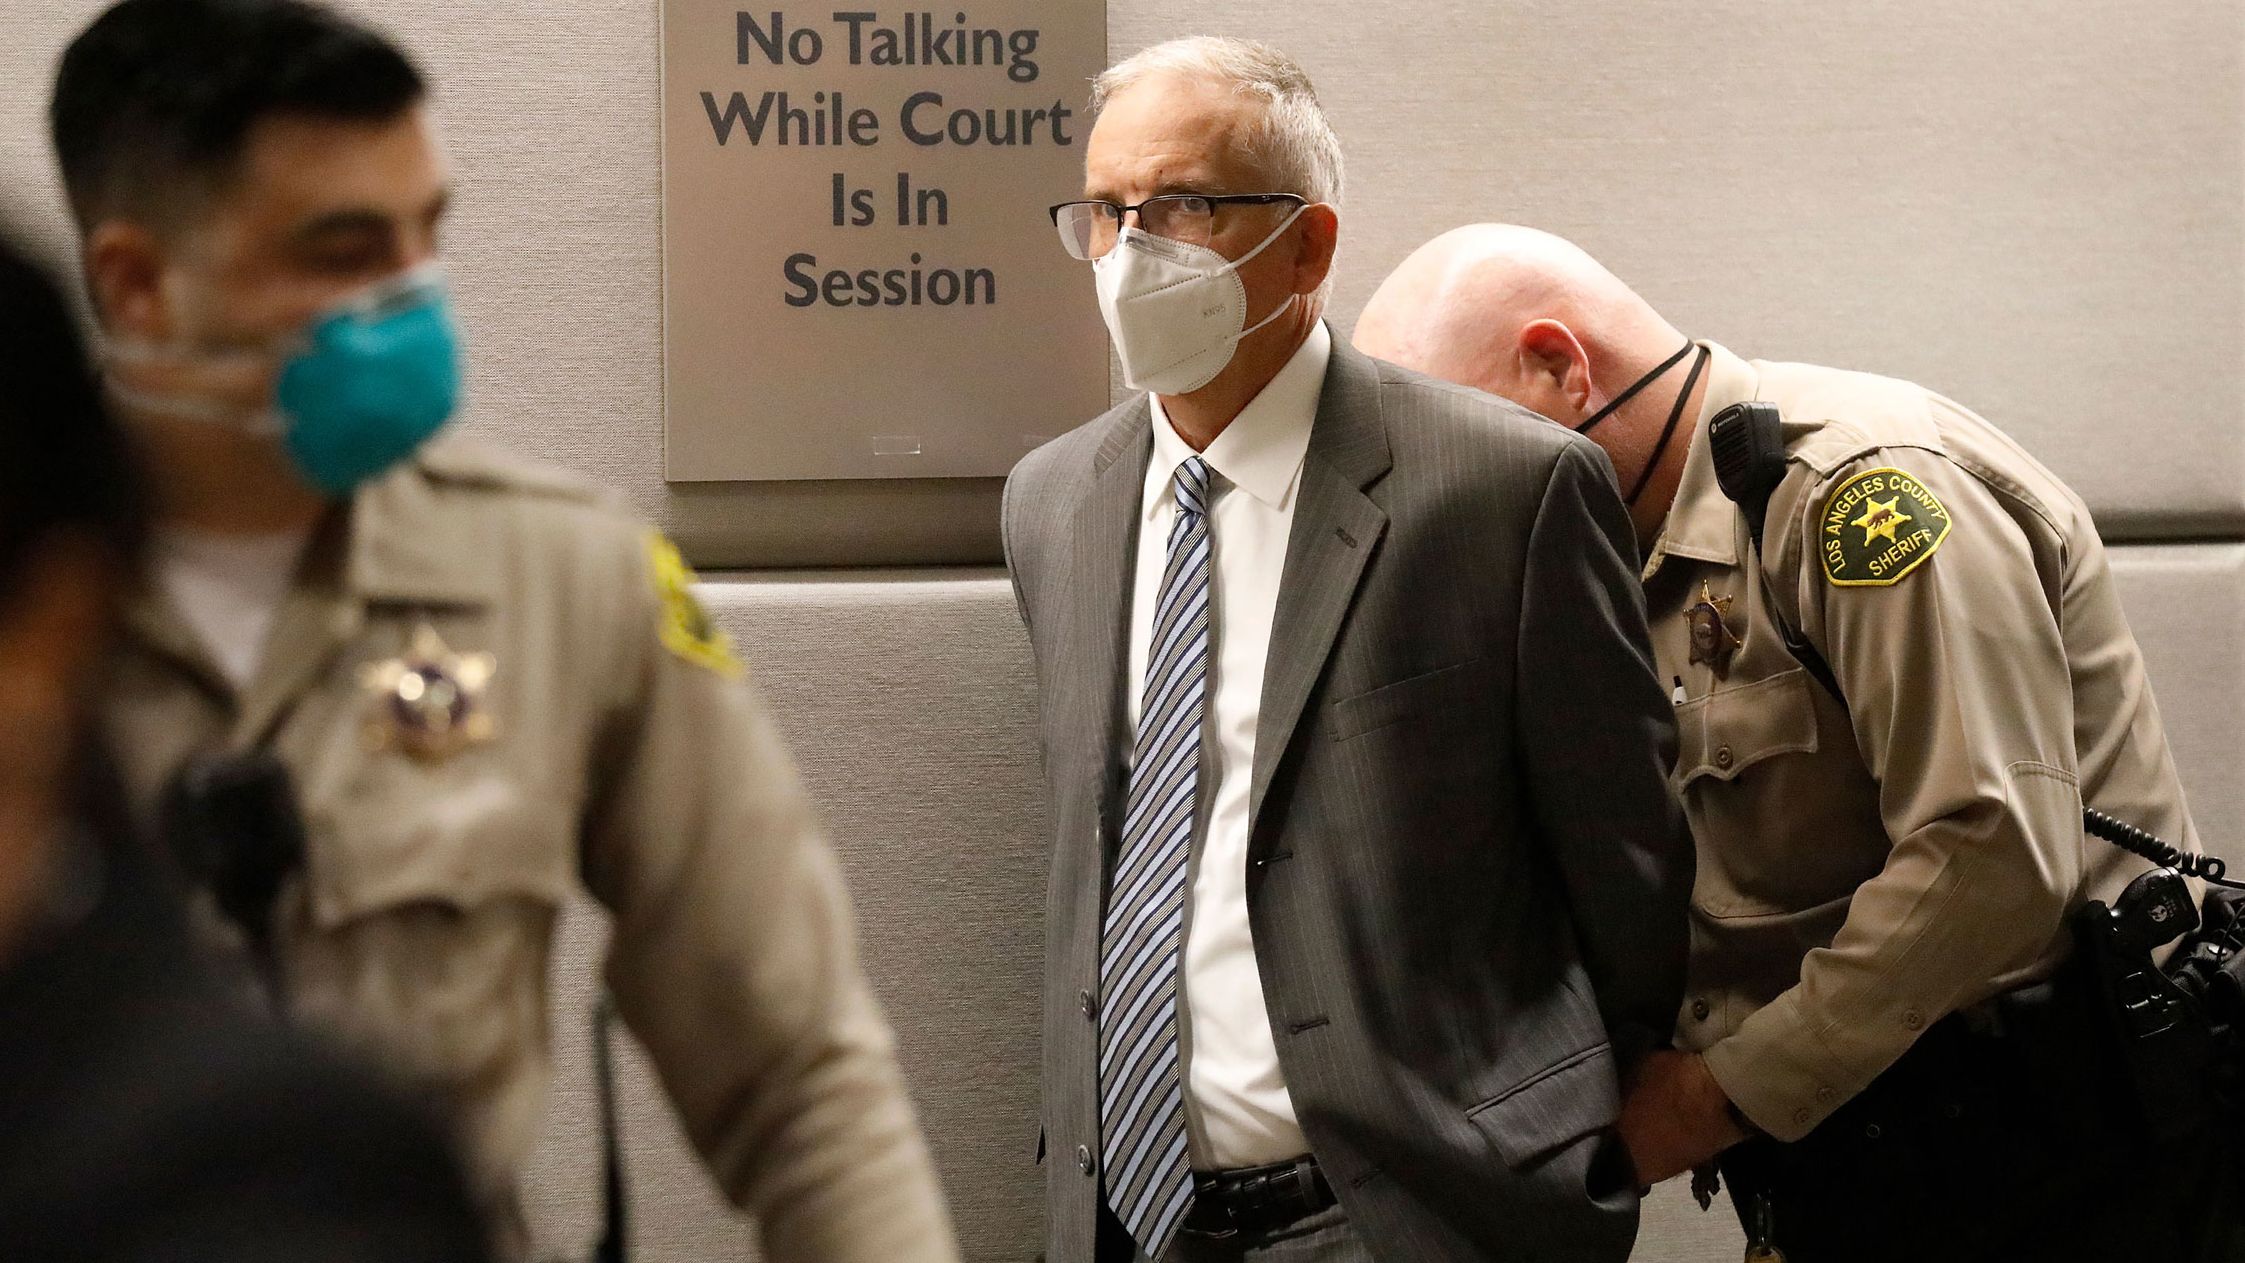 Former UCLA Gynecologist Dr. James Heaps is taken into custody as he appears in Los Angeles Superior Court on August 3, 2020 in Los Angeles.